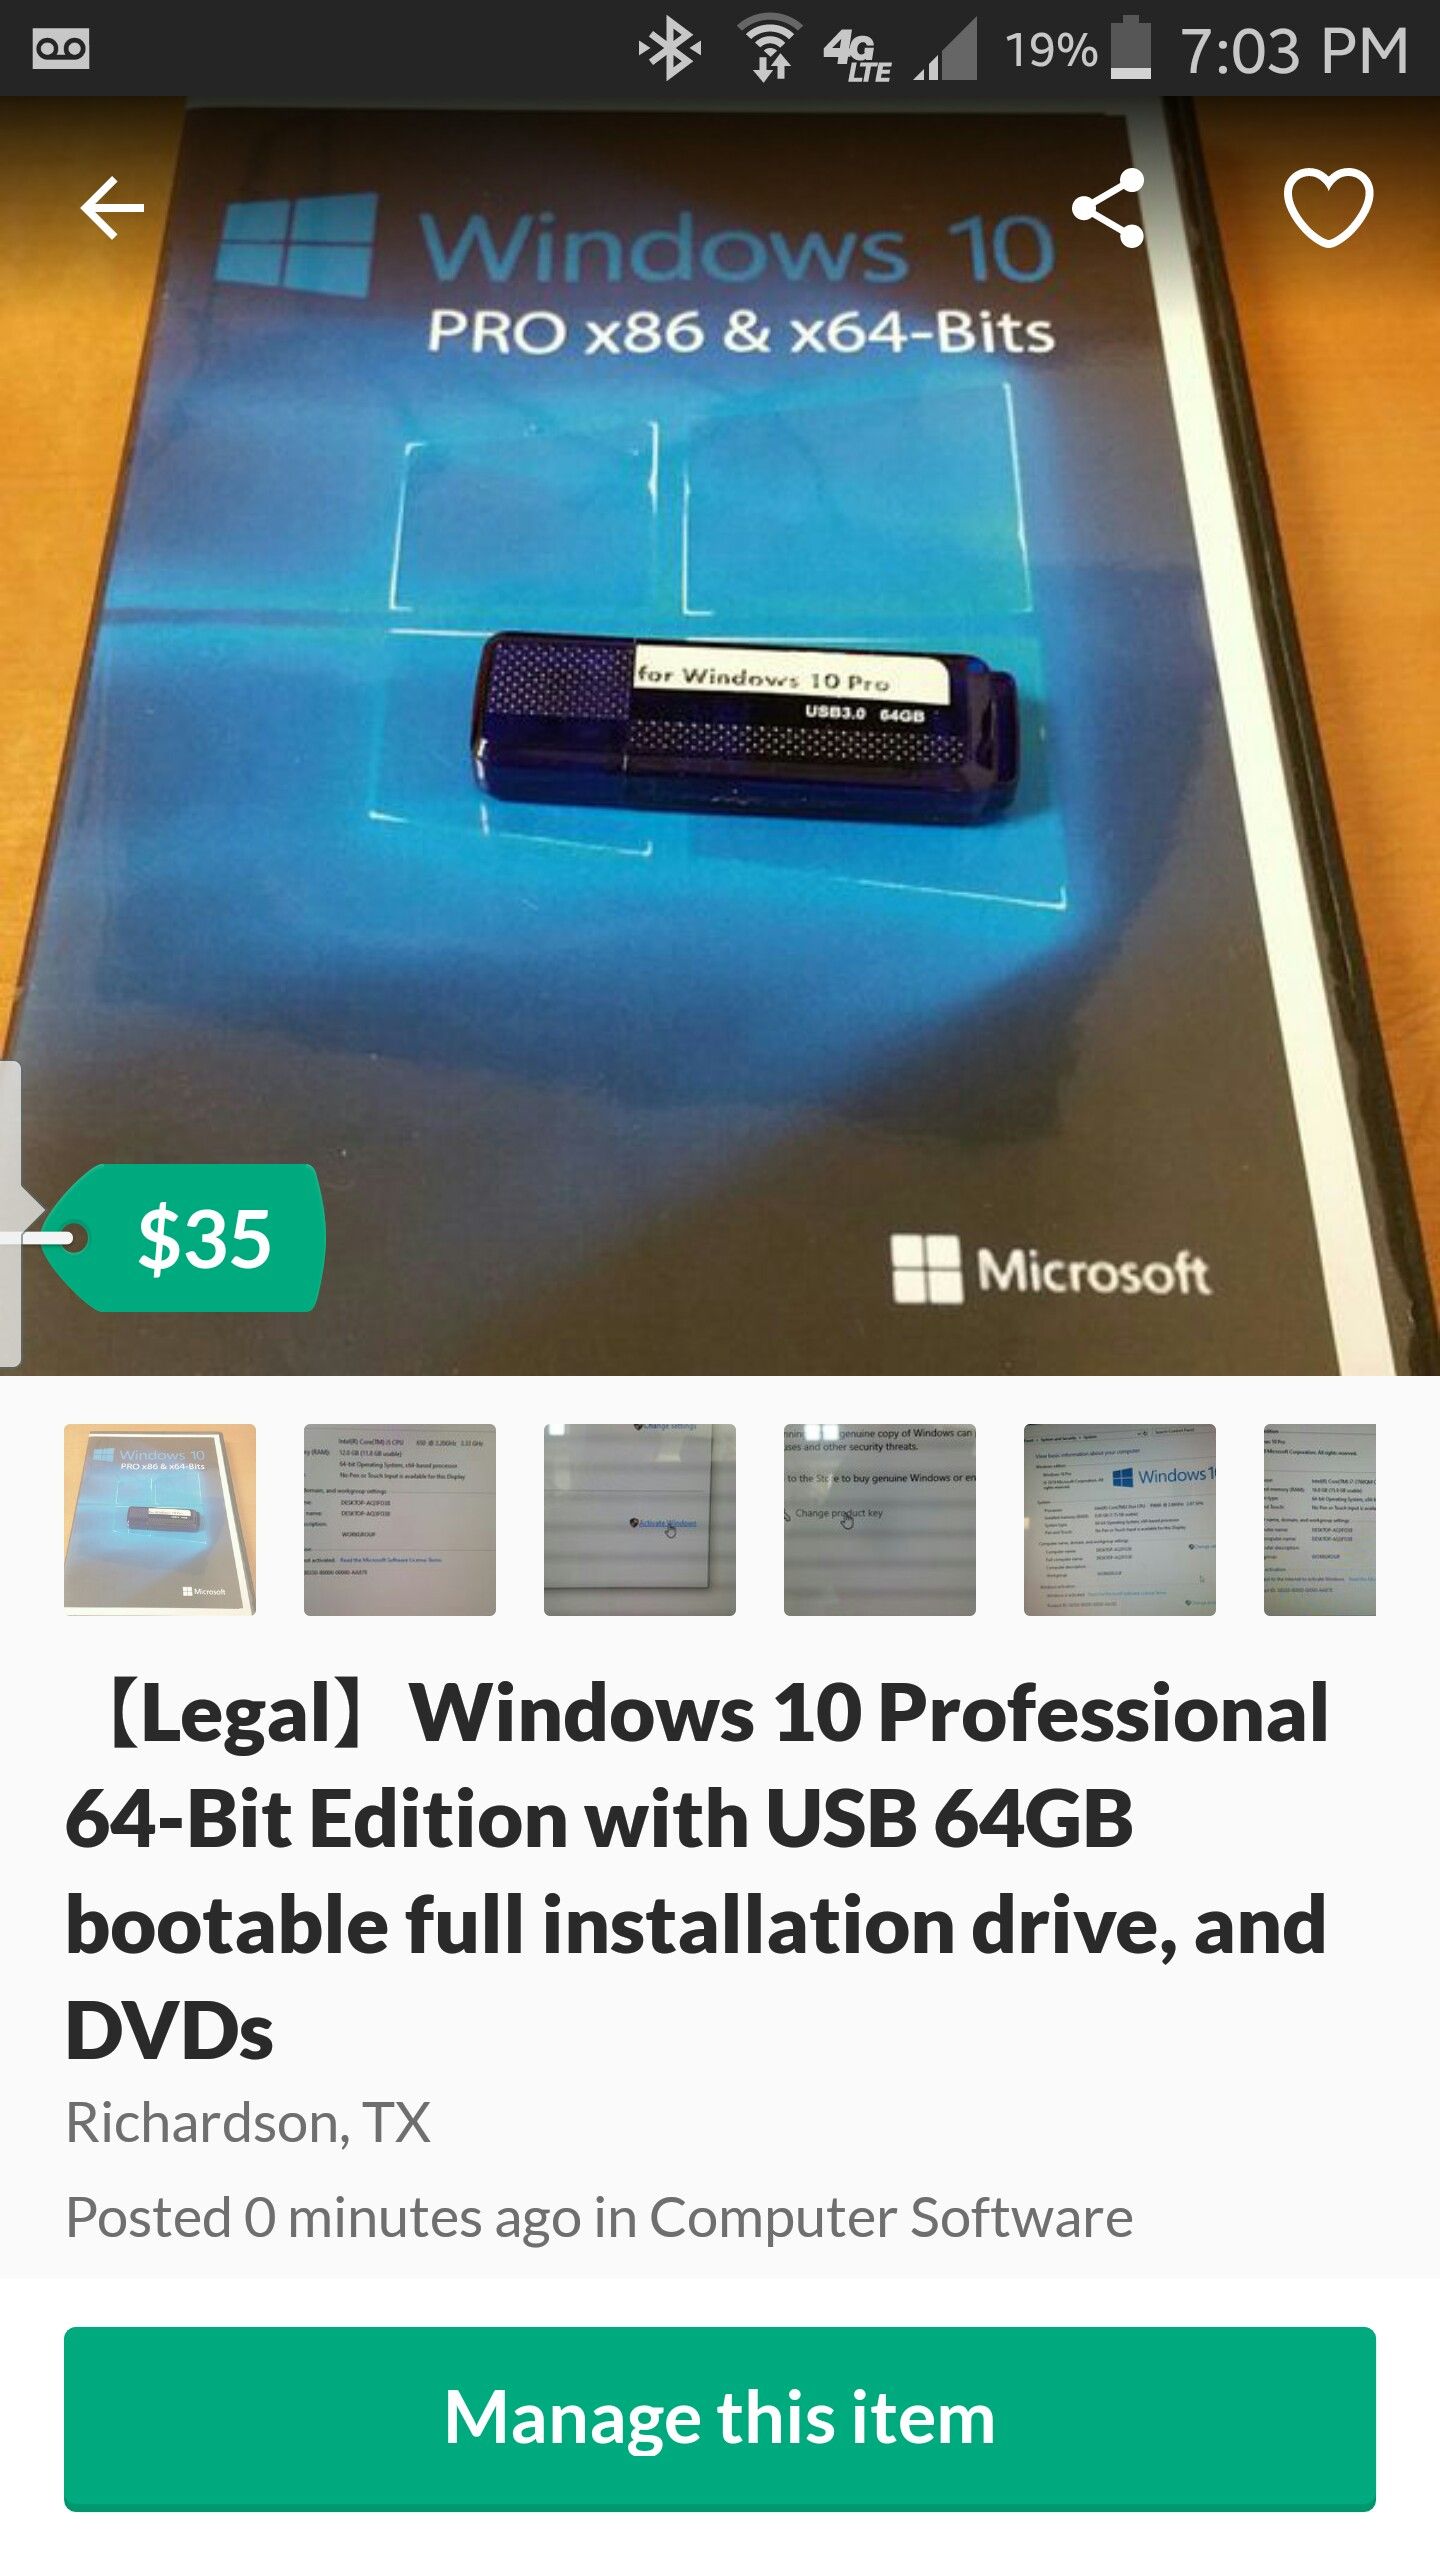 【Legal】Windows 10 Professional 64-Bit Edition 【latest version】with USB 64GB bootable full installation drive, and DVDs